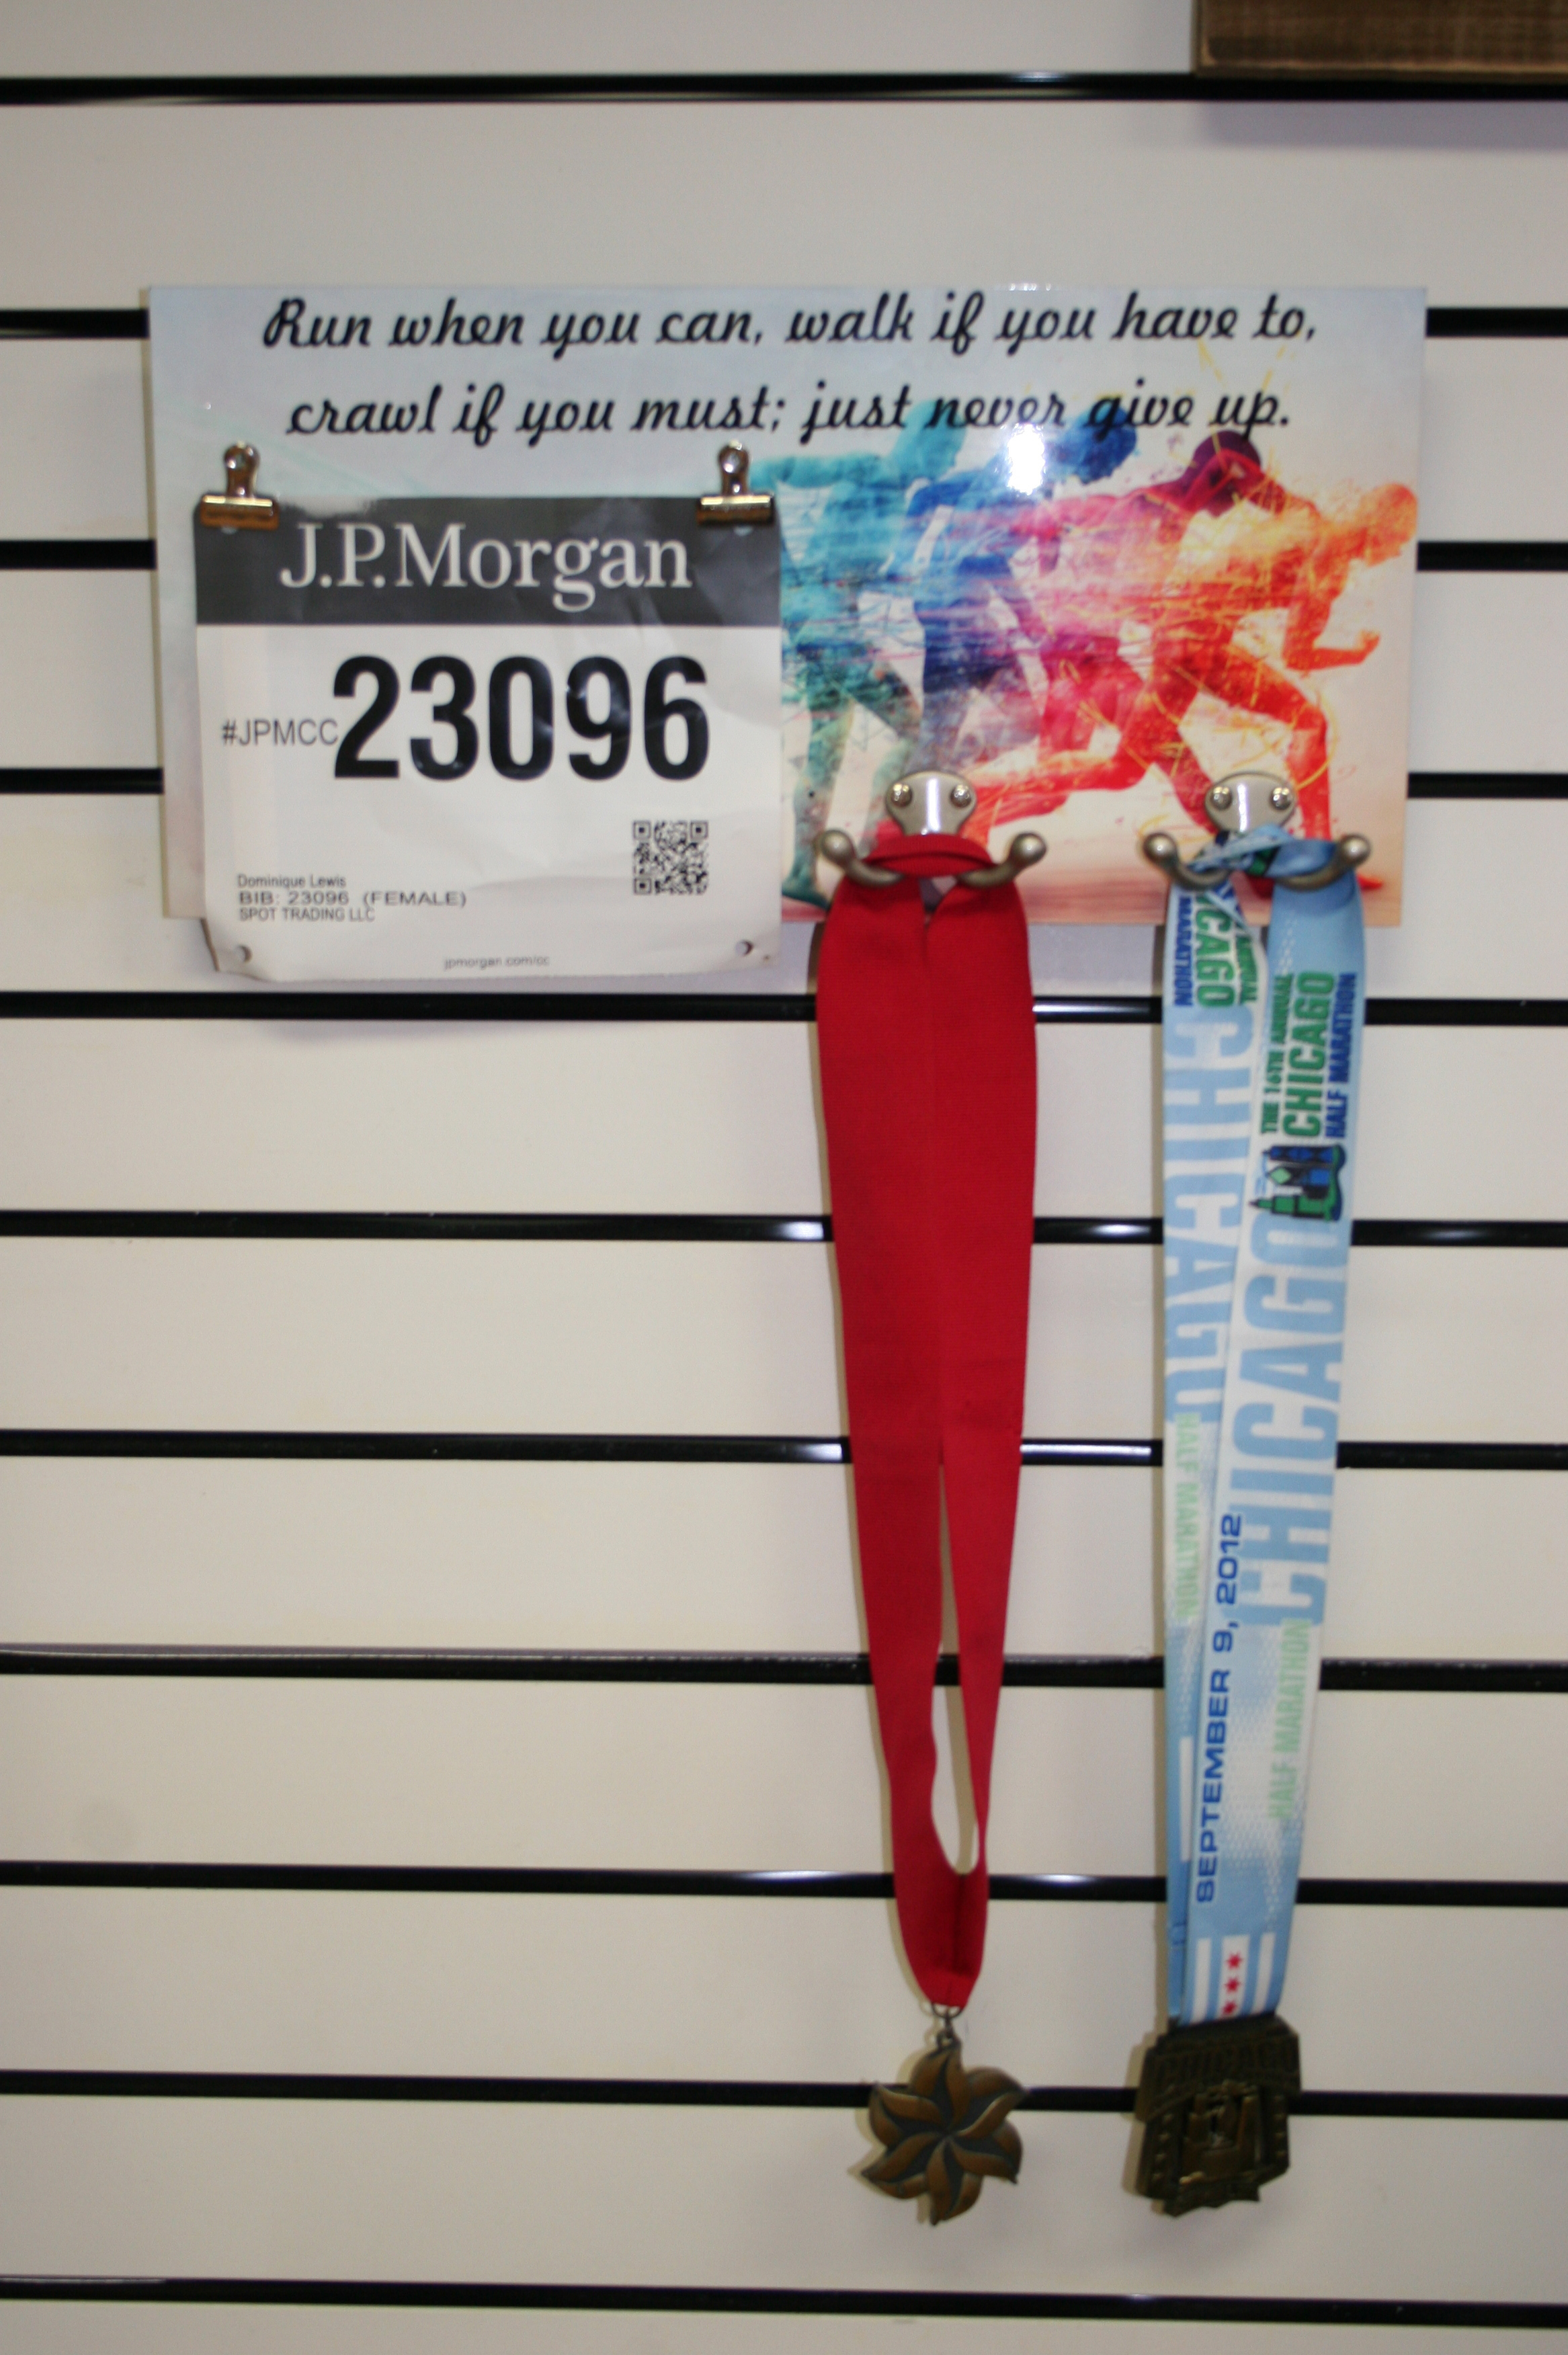 Marathon Runner Medal Board made with sublimation printing